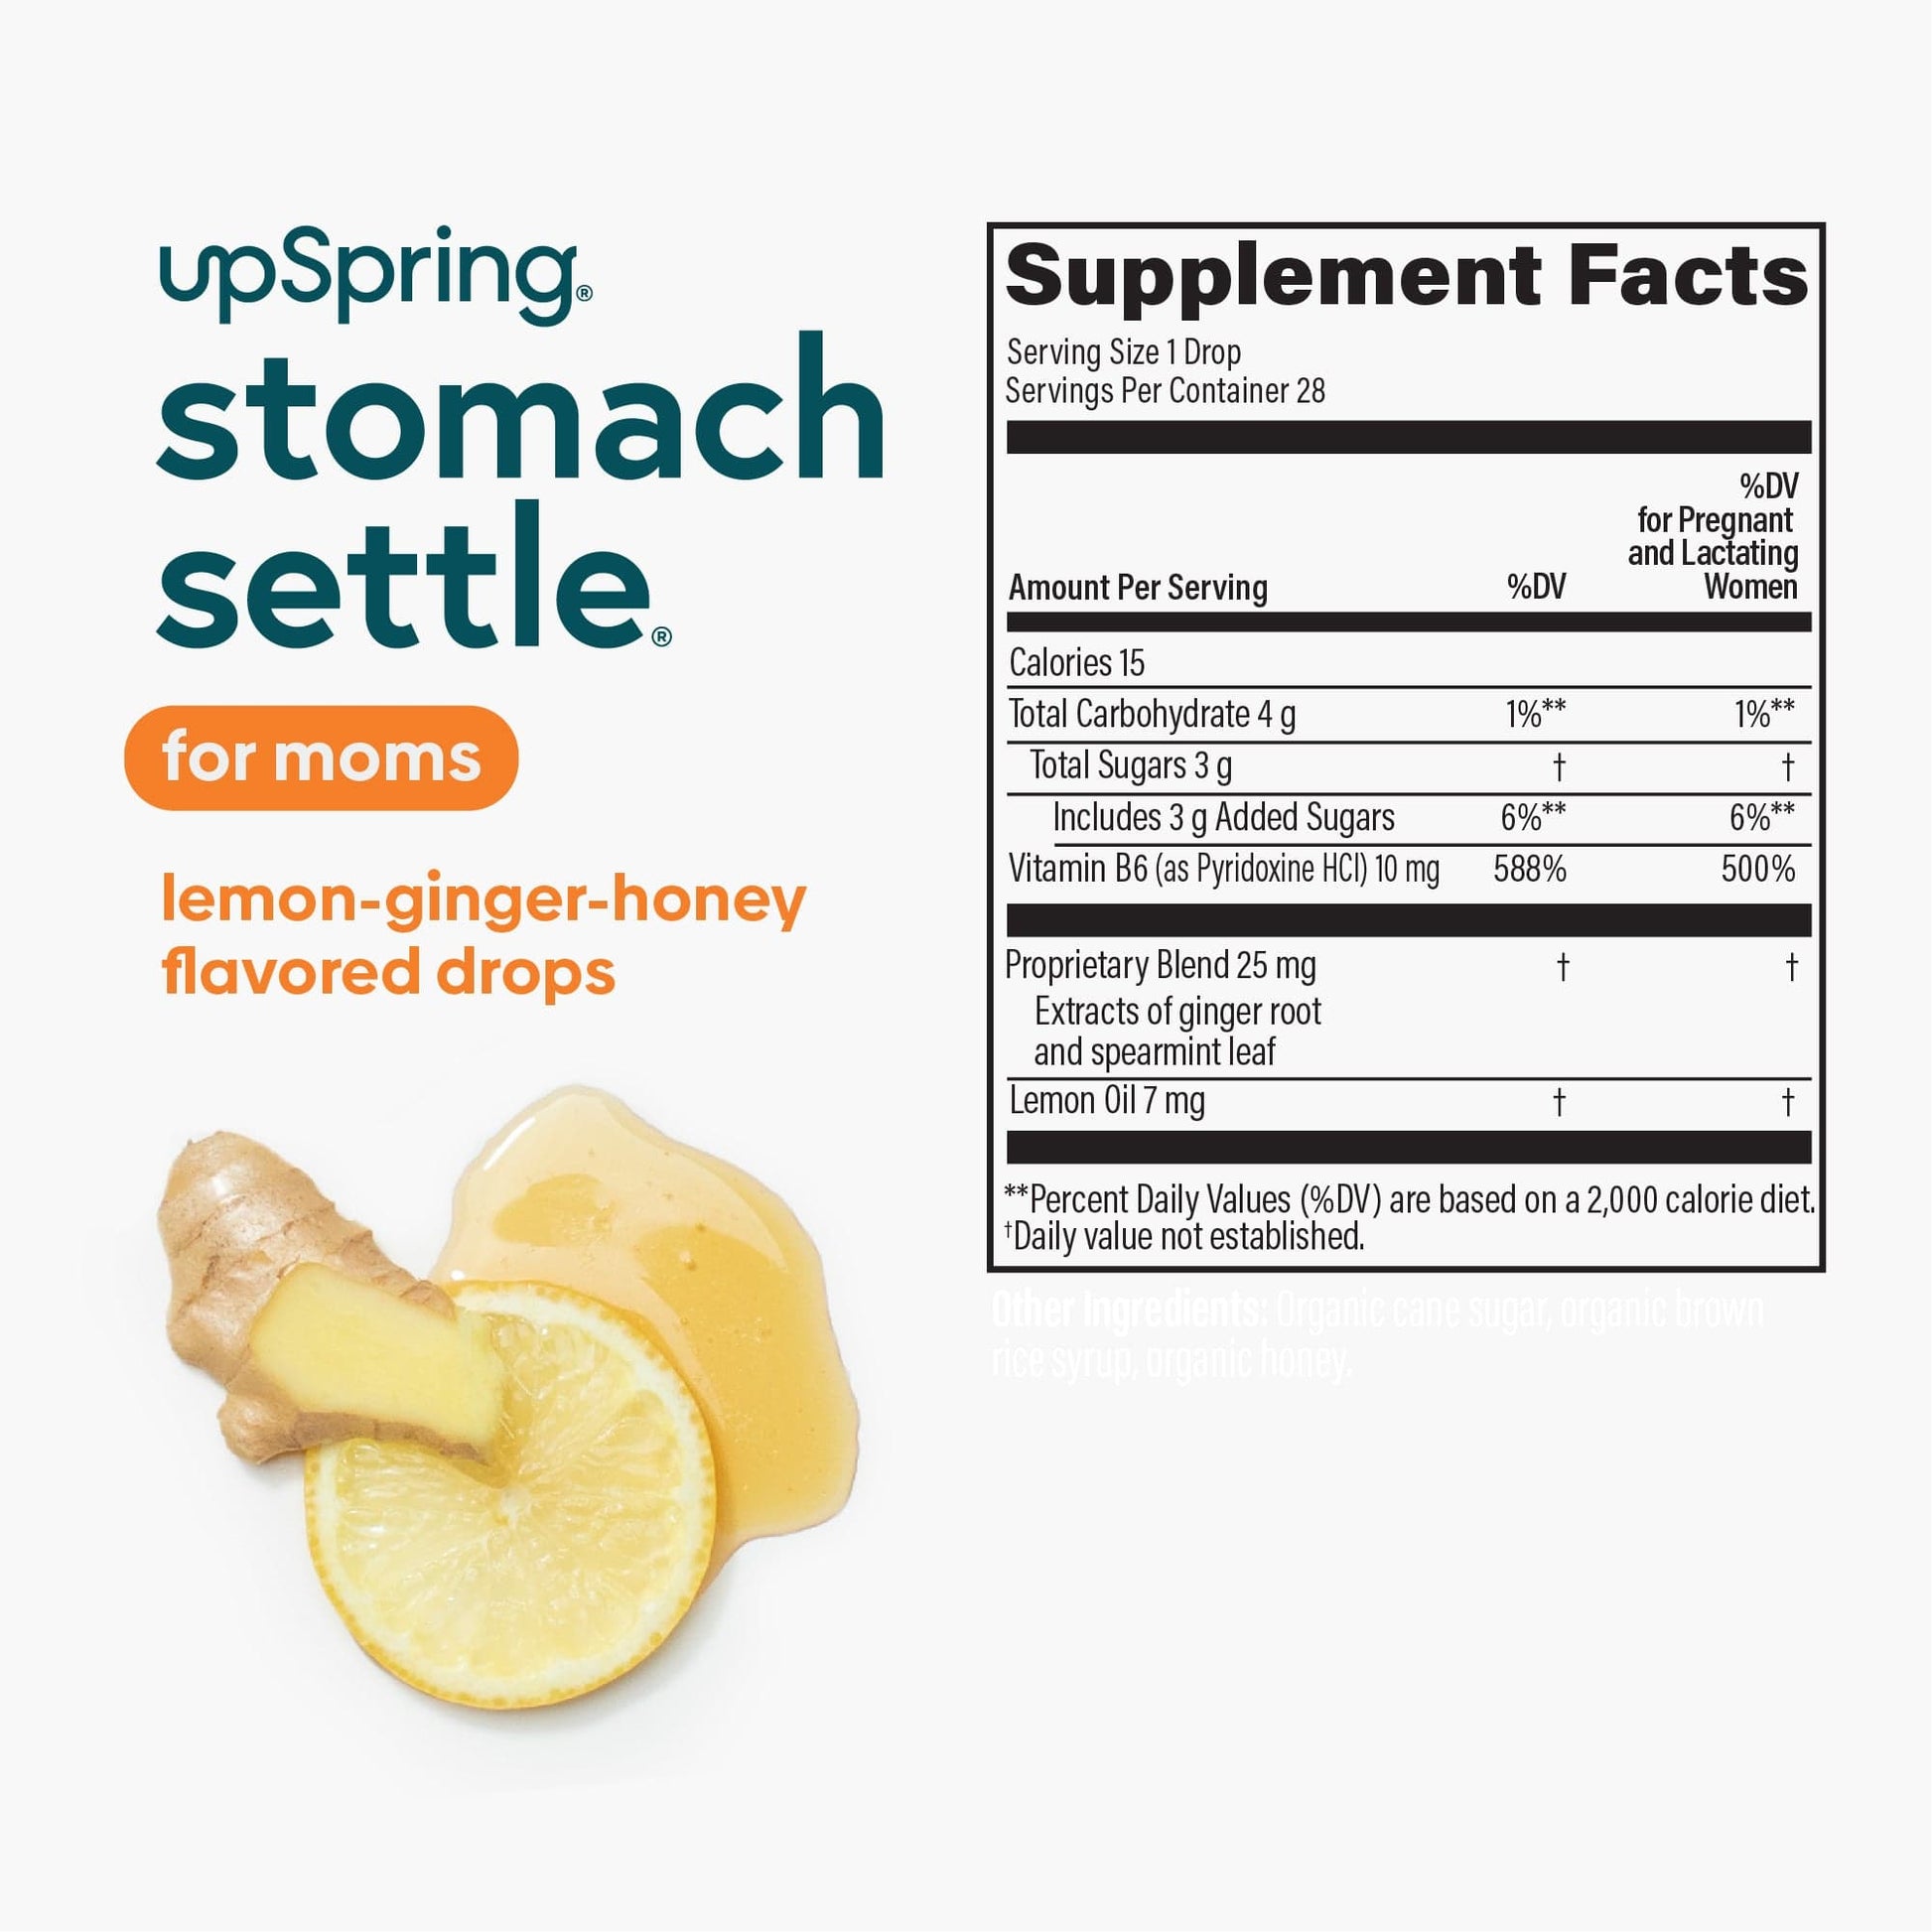 Supplement facts and ingredient information for Stomach Settle for Moms